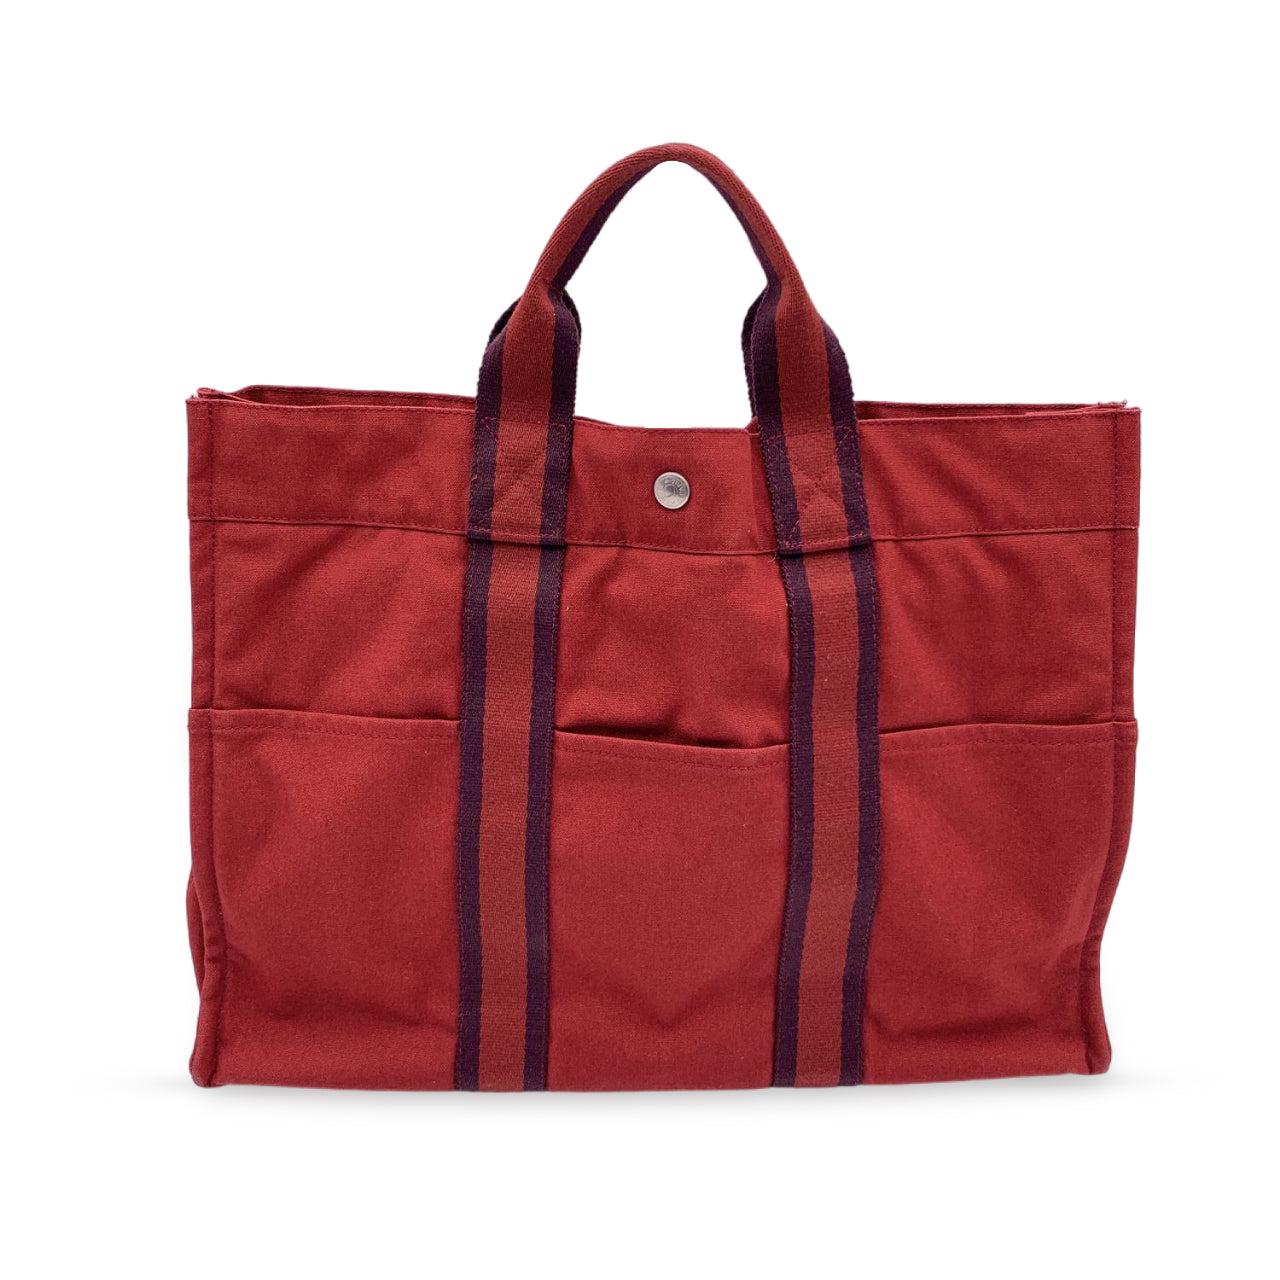 Hermes Paris Vintage red cotton canvas tote, Fourre Tout MM. Made in France. Red color with contrast stripes. 100% Cotton. 3 front pockets on the front and 3 pockets on the back. It has snaps (buttons) on both ends for expansion. Durable canvas